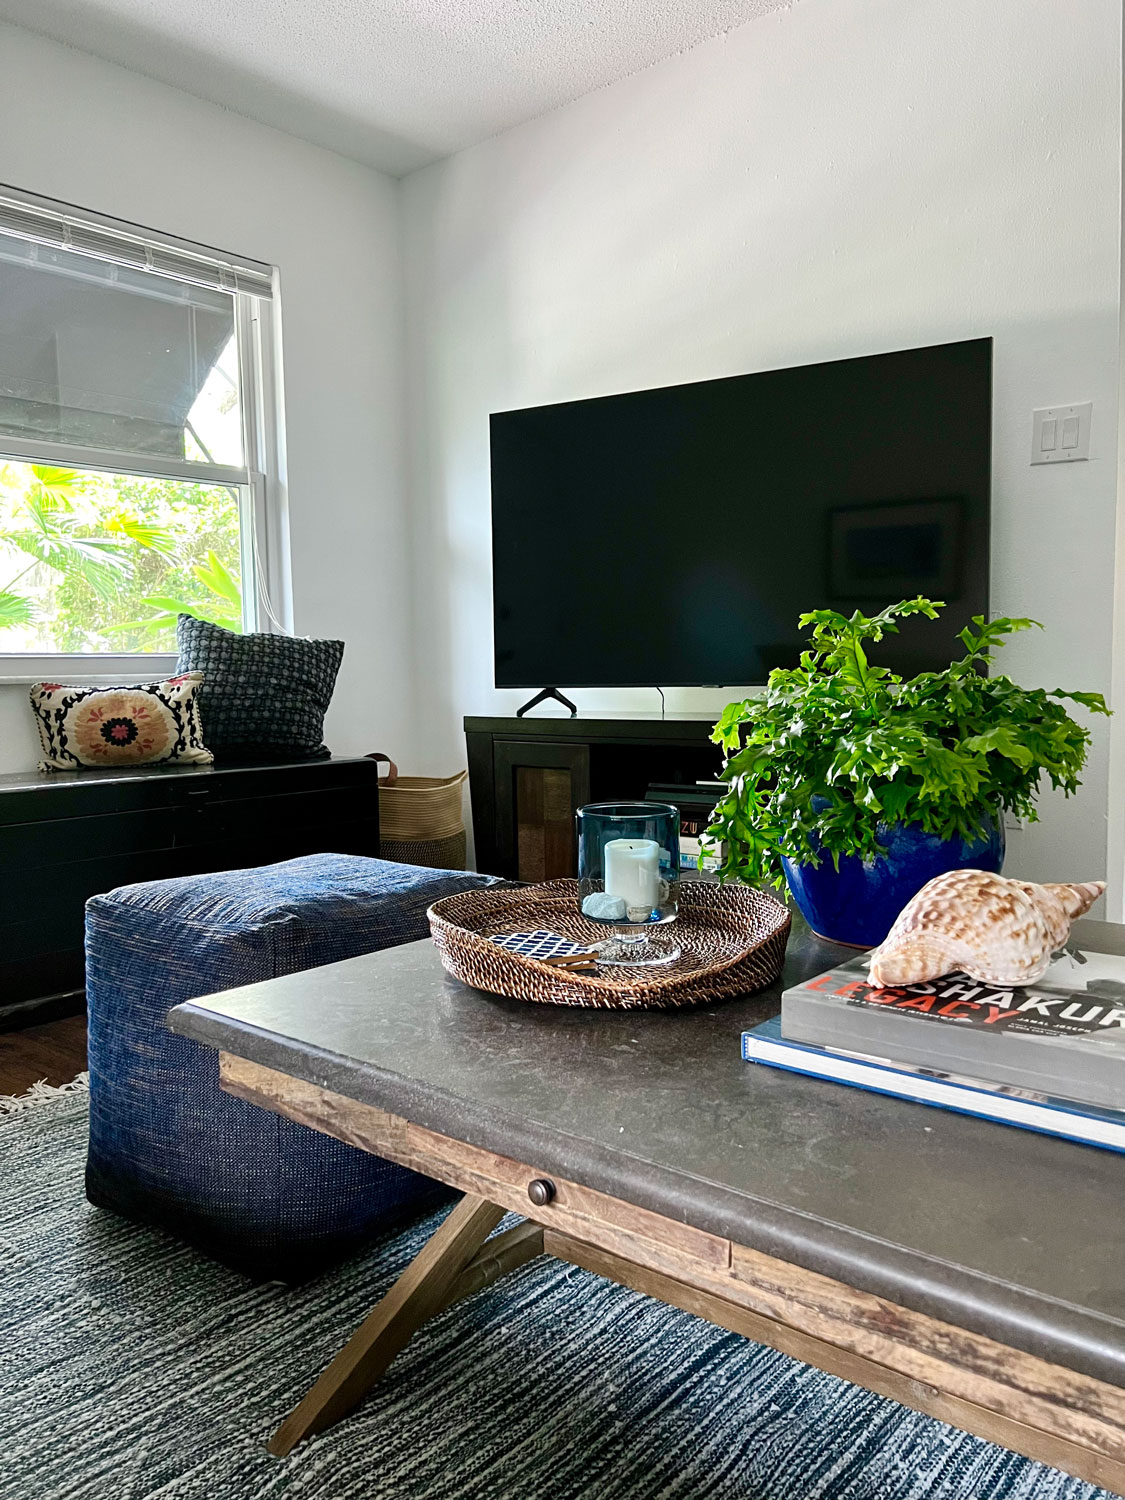 Television and coffee table